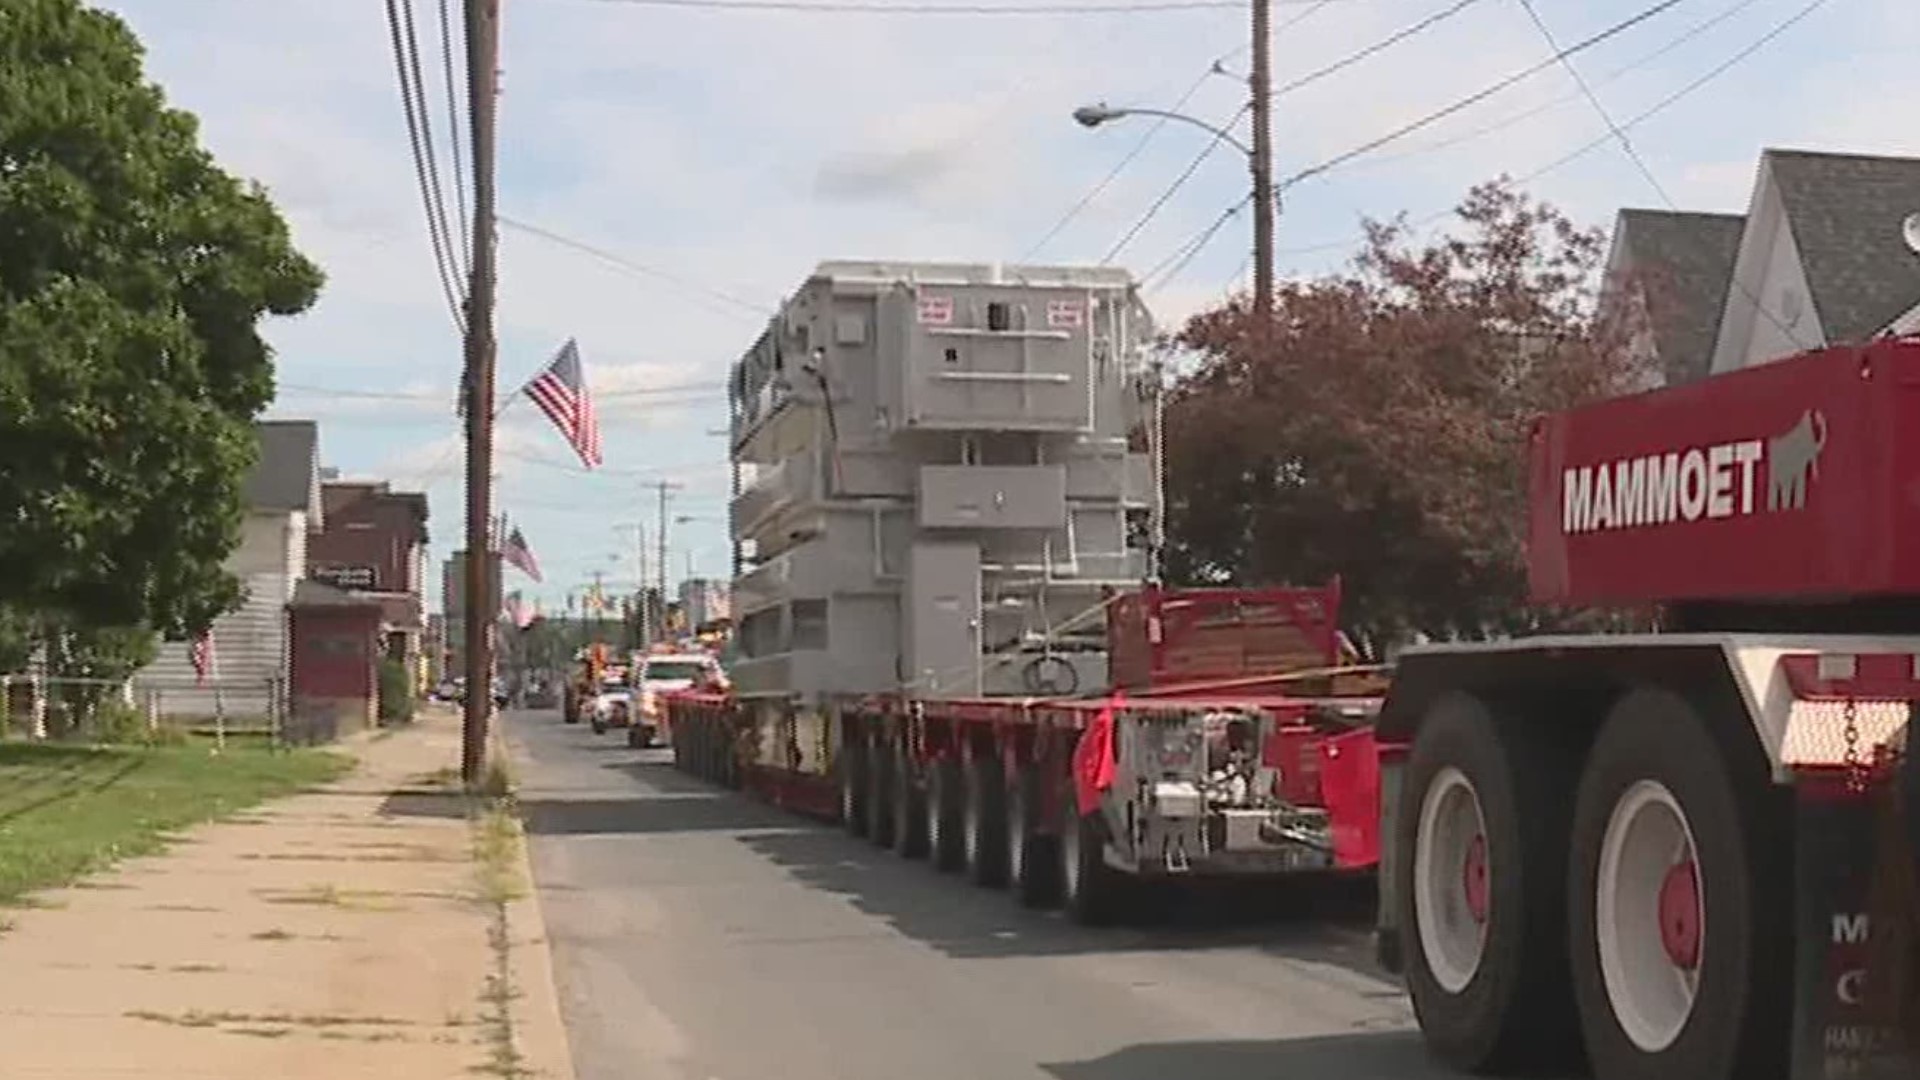 A super load finally hit the road Wednesday in Dickson City.